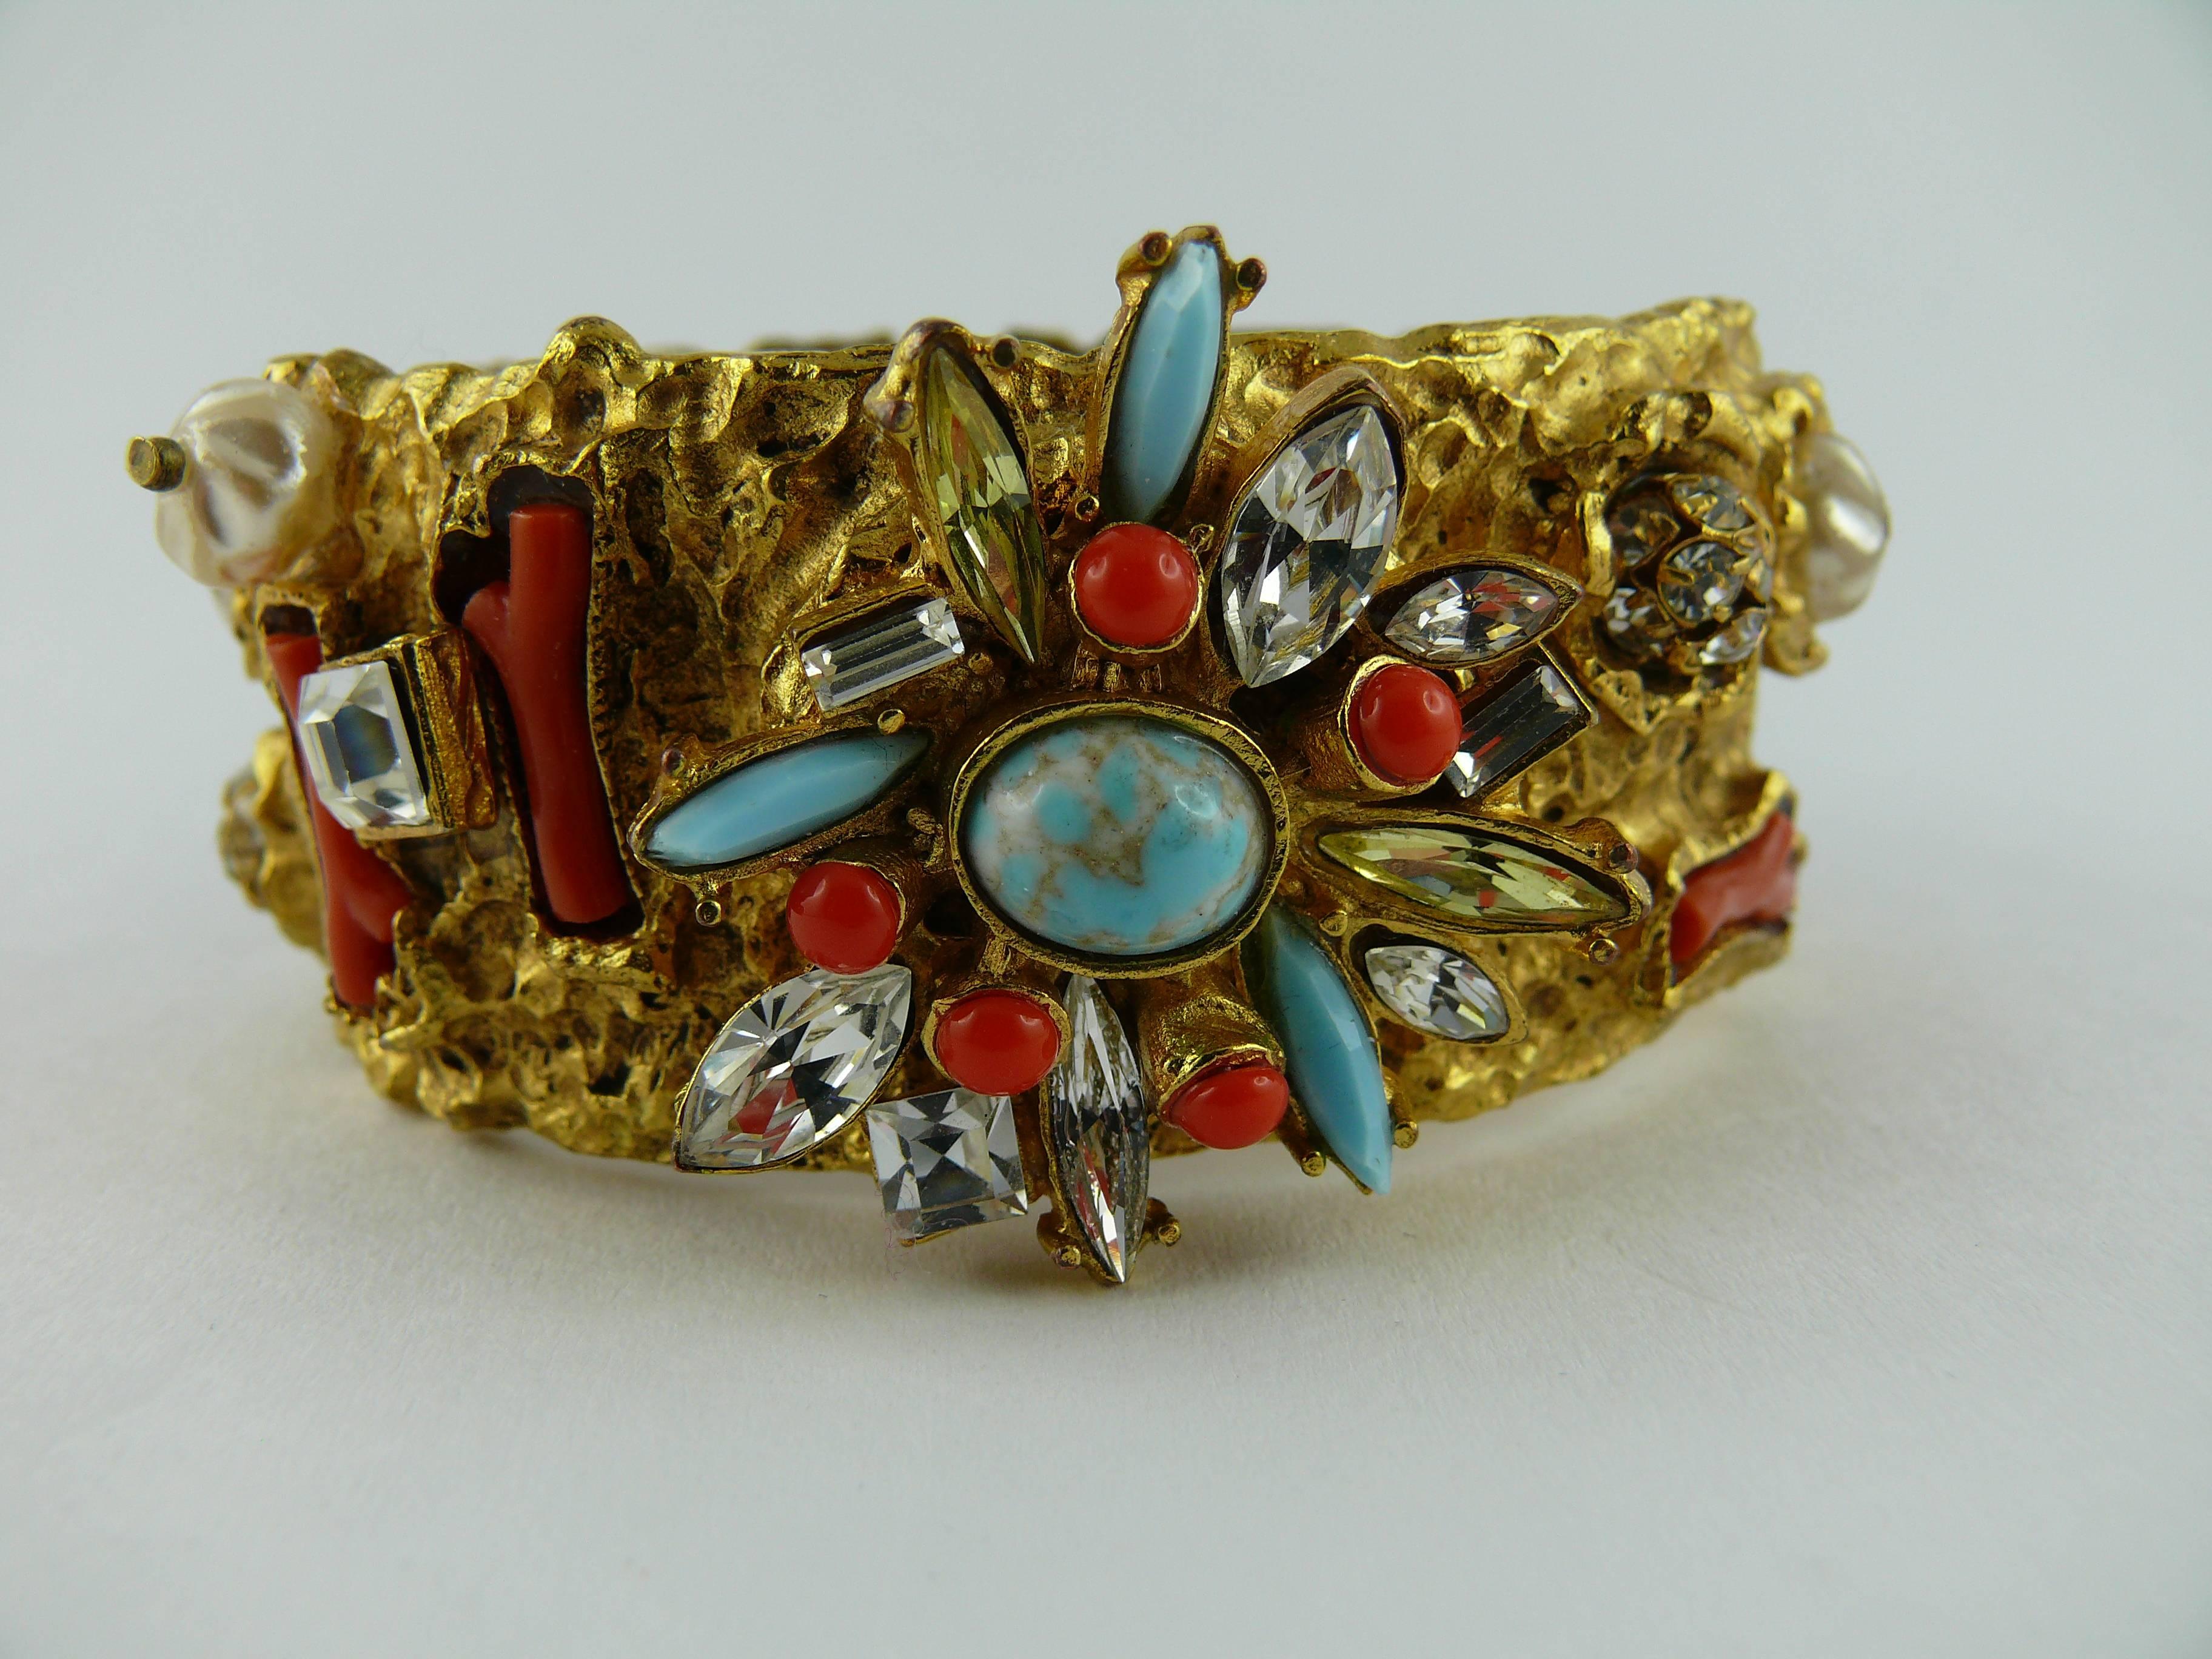 CHRISTIAN LACROIX vintage opulent jewelled clamper bracelet.

Texture gold tone bracelet embellished with multicolored crystals, faux turquoise and coral stones, faux pearls.

Marked CHRISTIAN LACROIX CL Made in France.

Indicative measurements :